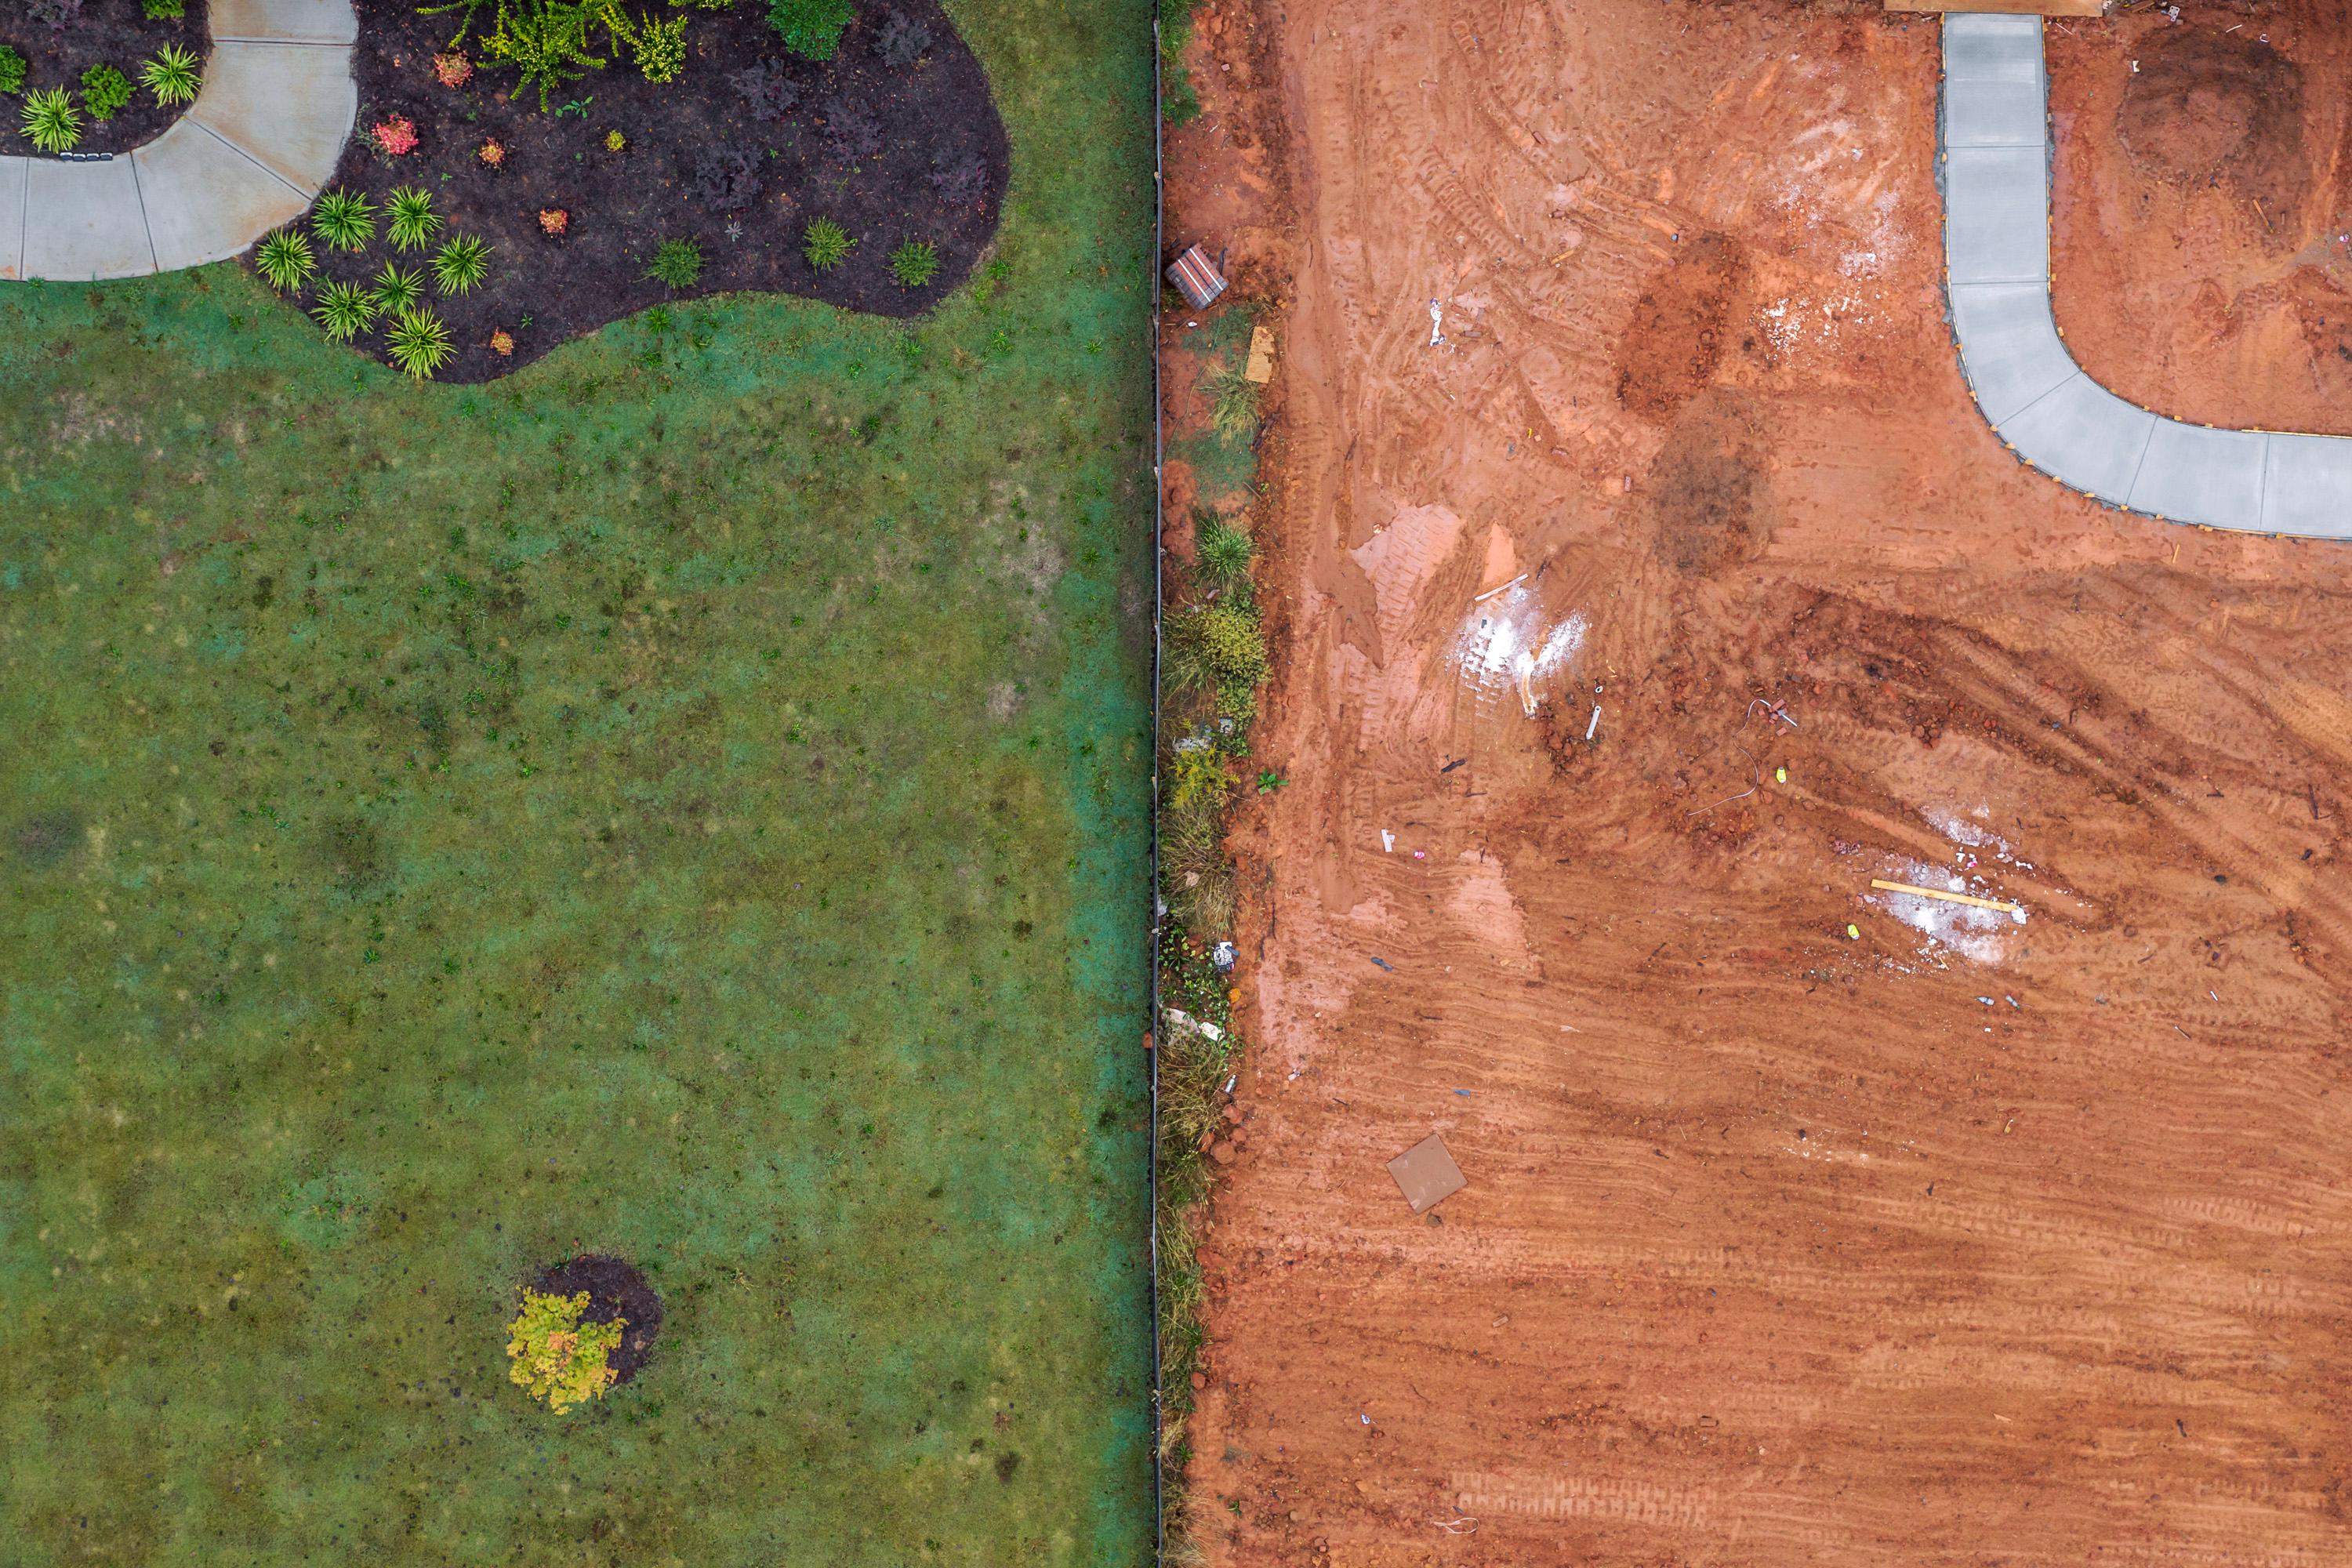 "Construction Site, Mountain Park, Georgia #1, 2019" is a drone photograph featuring hues of red, orange, green and grey. Edition of 5. This photograph may be available in additional sizes. Peter Essick is inspired by the work of Walker Evans, Ray